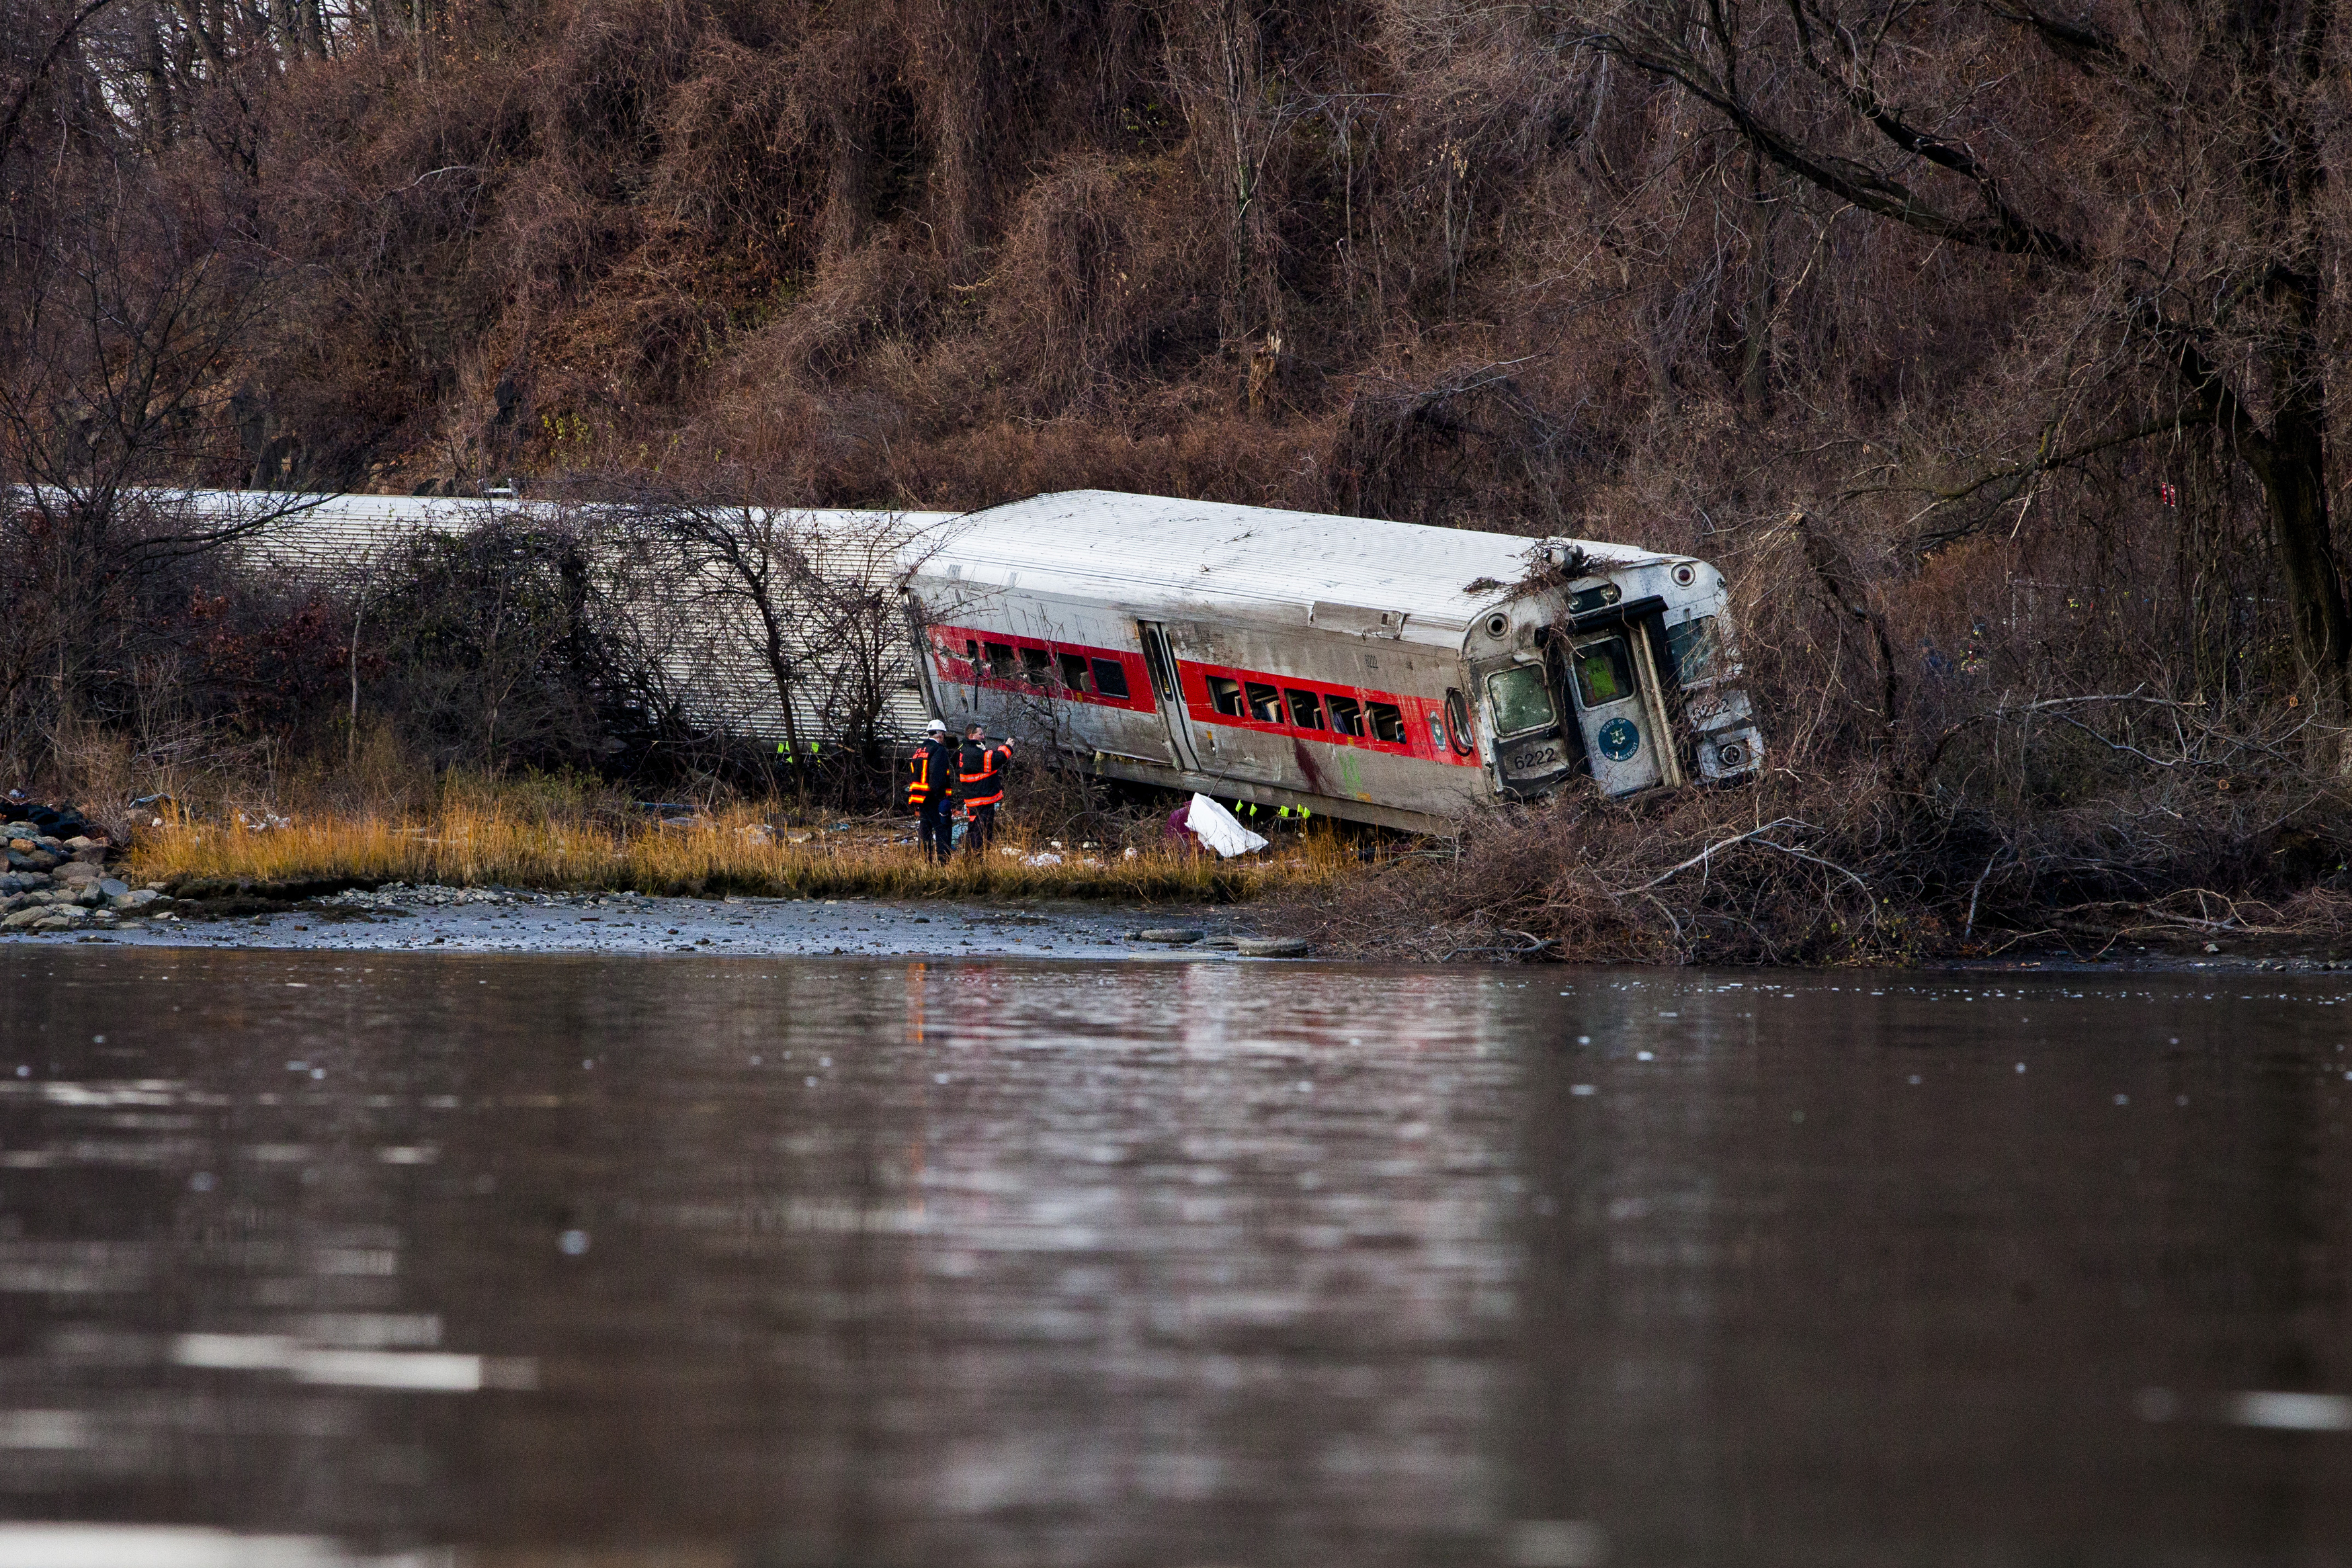 Metro-North Train Derails In Bronx, Multiple Injuries, Deaths Reported